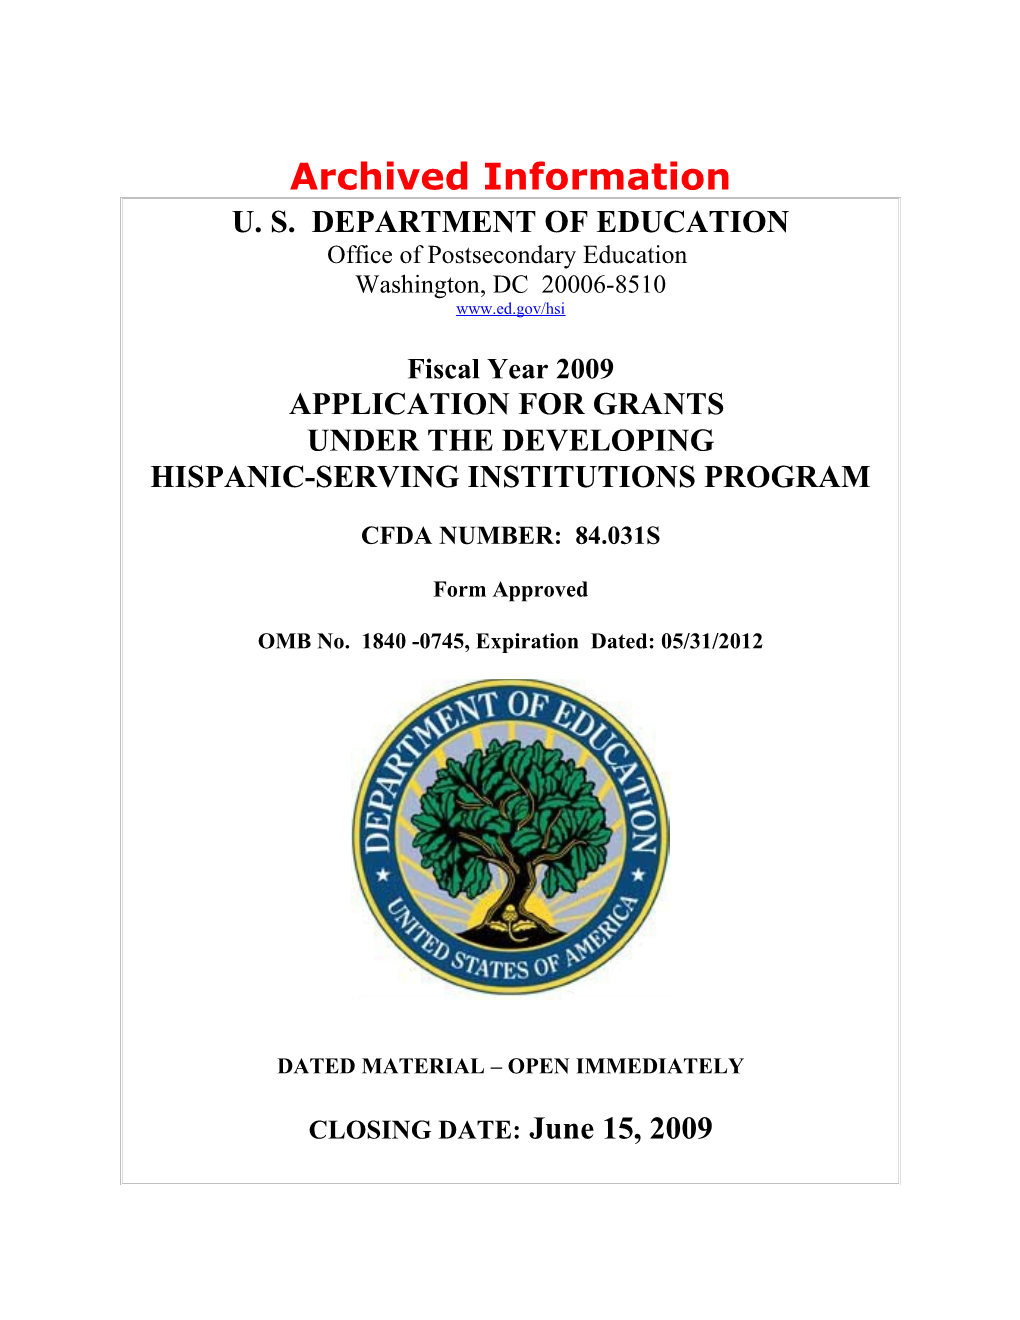 Archived: FY 2009 Application for Grants Under the Developing Hispanic-Serving Institutions